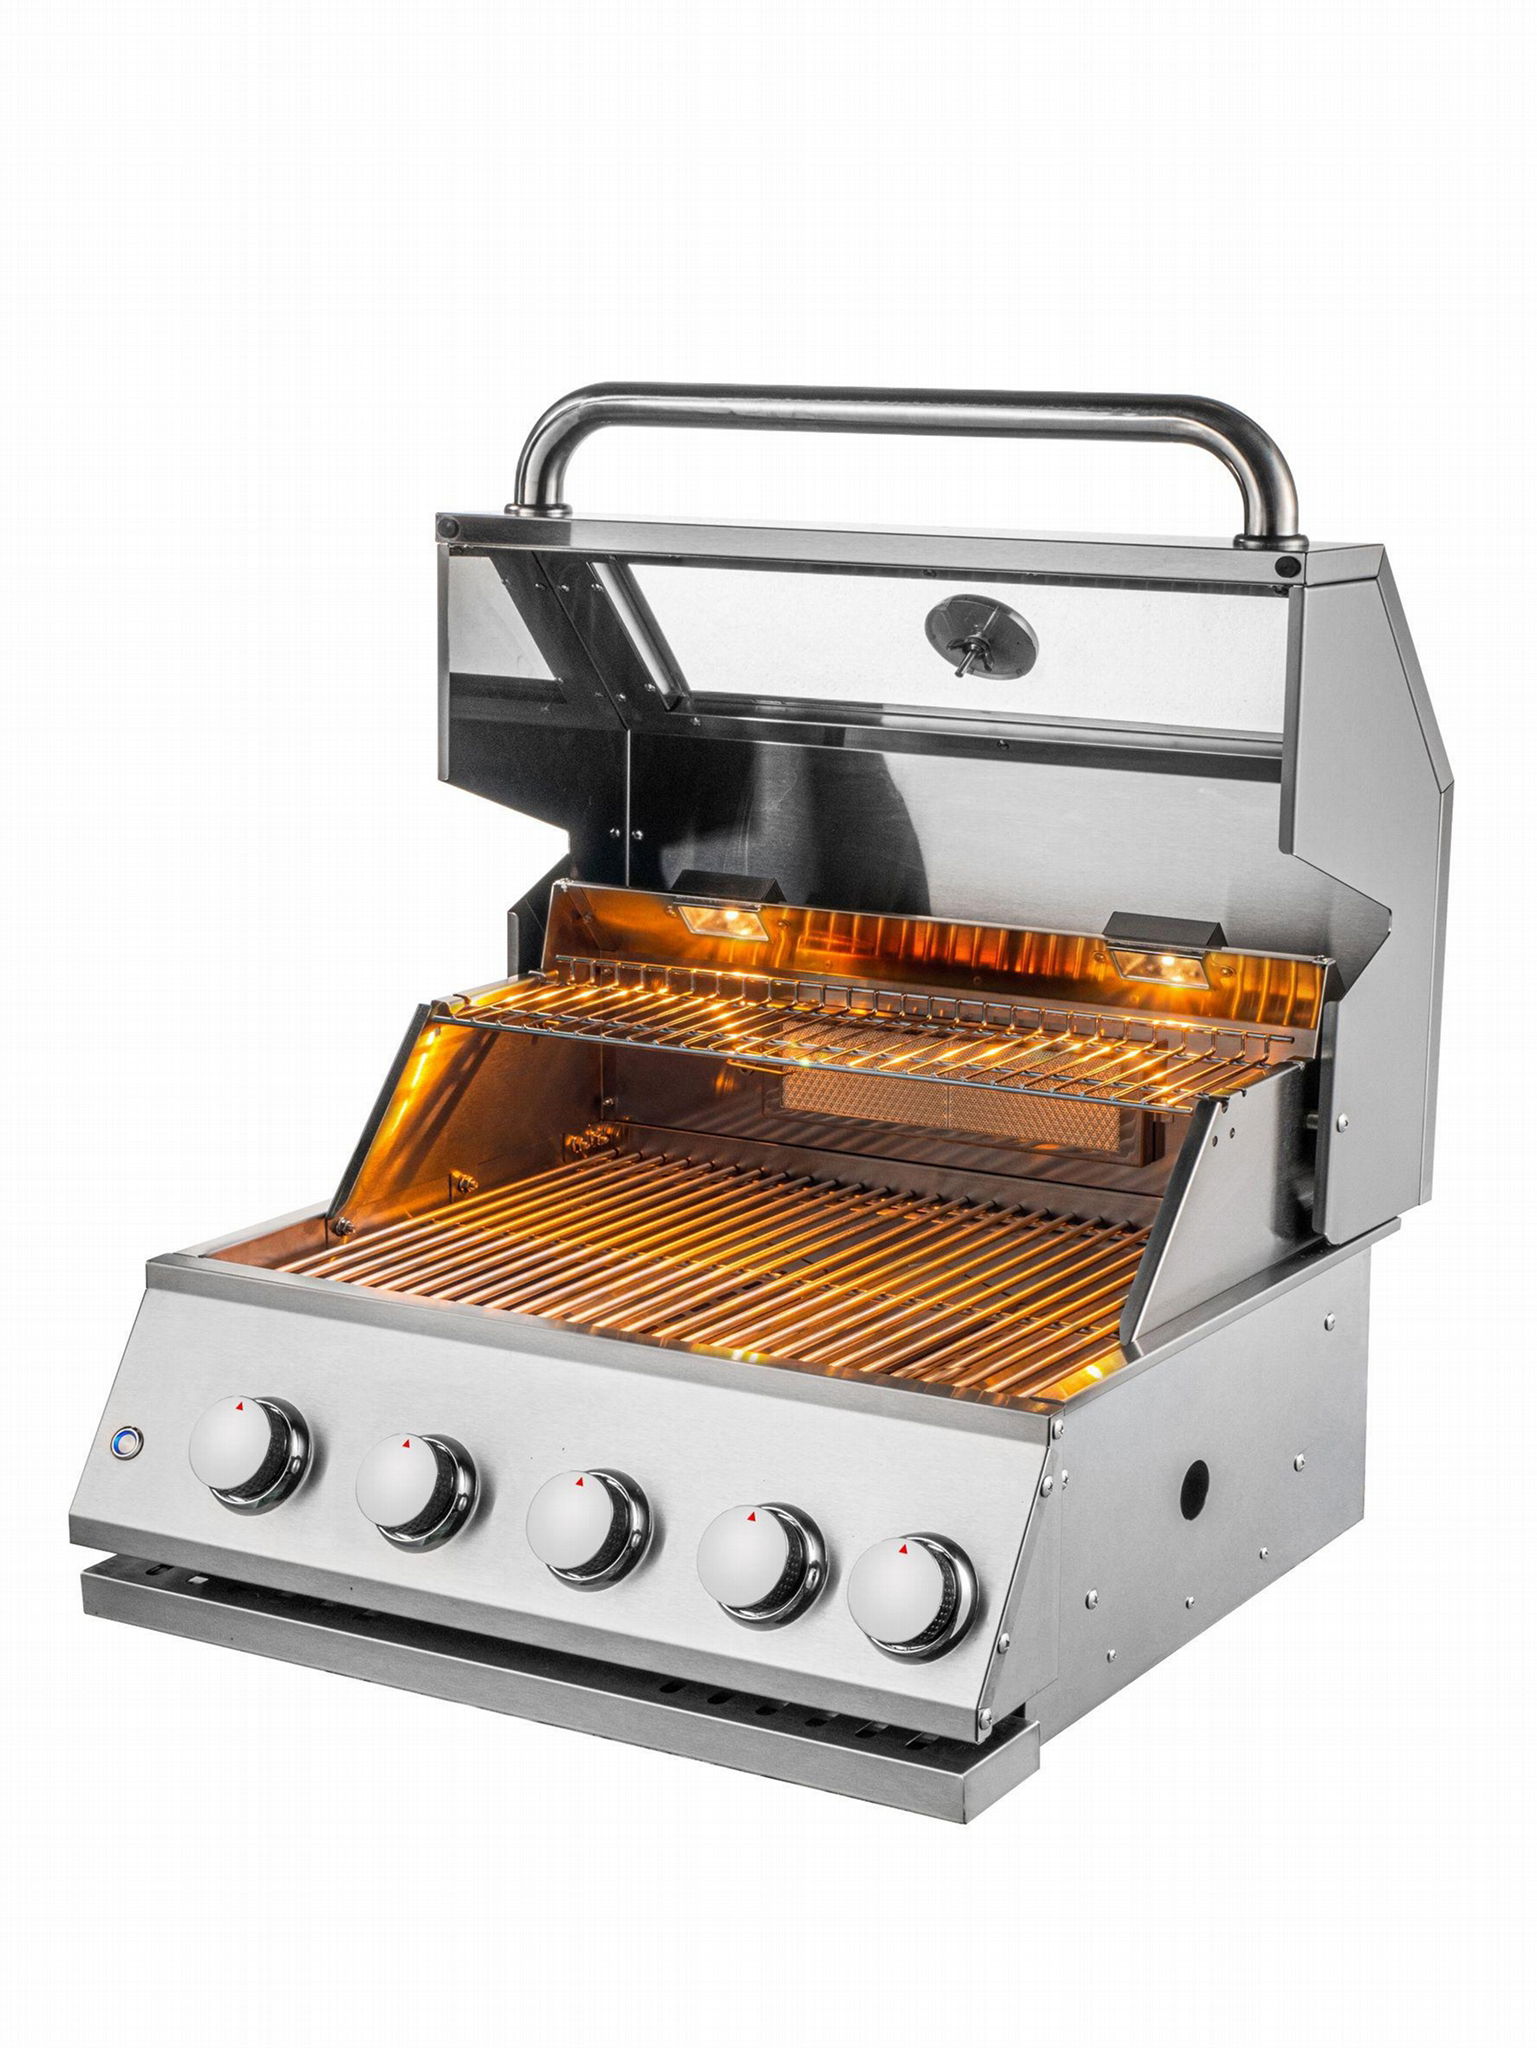 OUTDOOR GAS BBQ GRILL 2